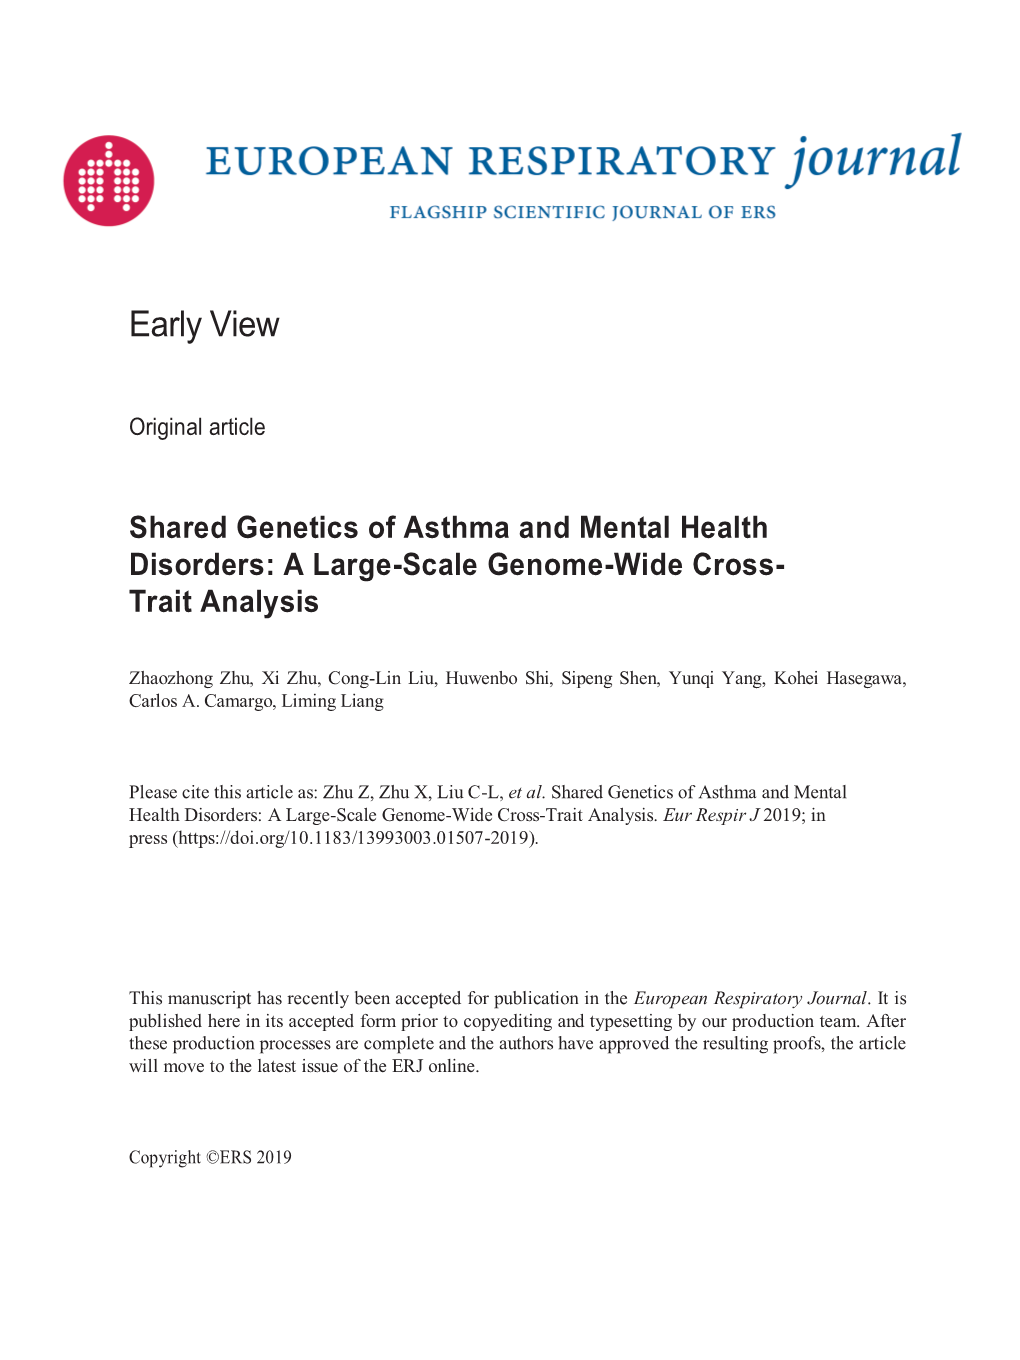 Shared Genetics of Asthma and Mental Health Disorders: a Large-Scale Genome-Wide Cross- Trait Analysis